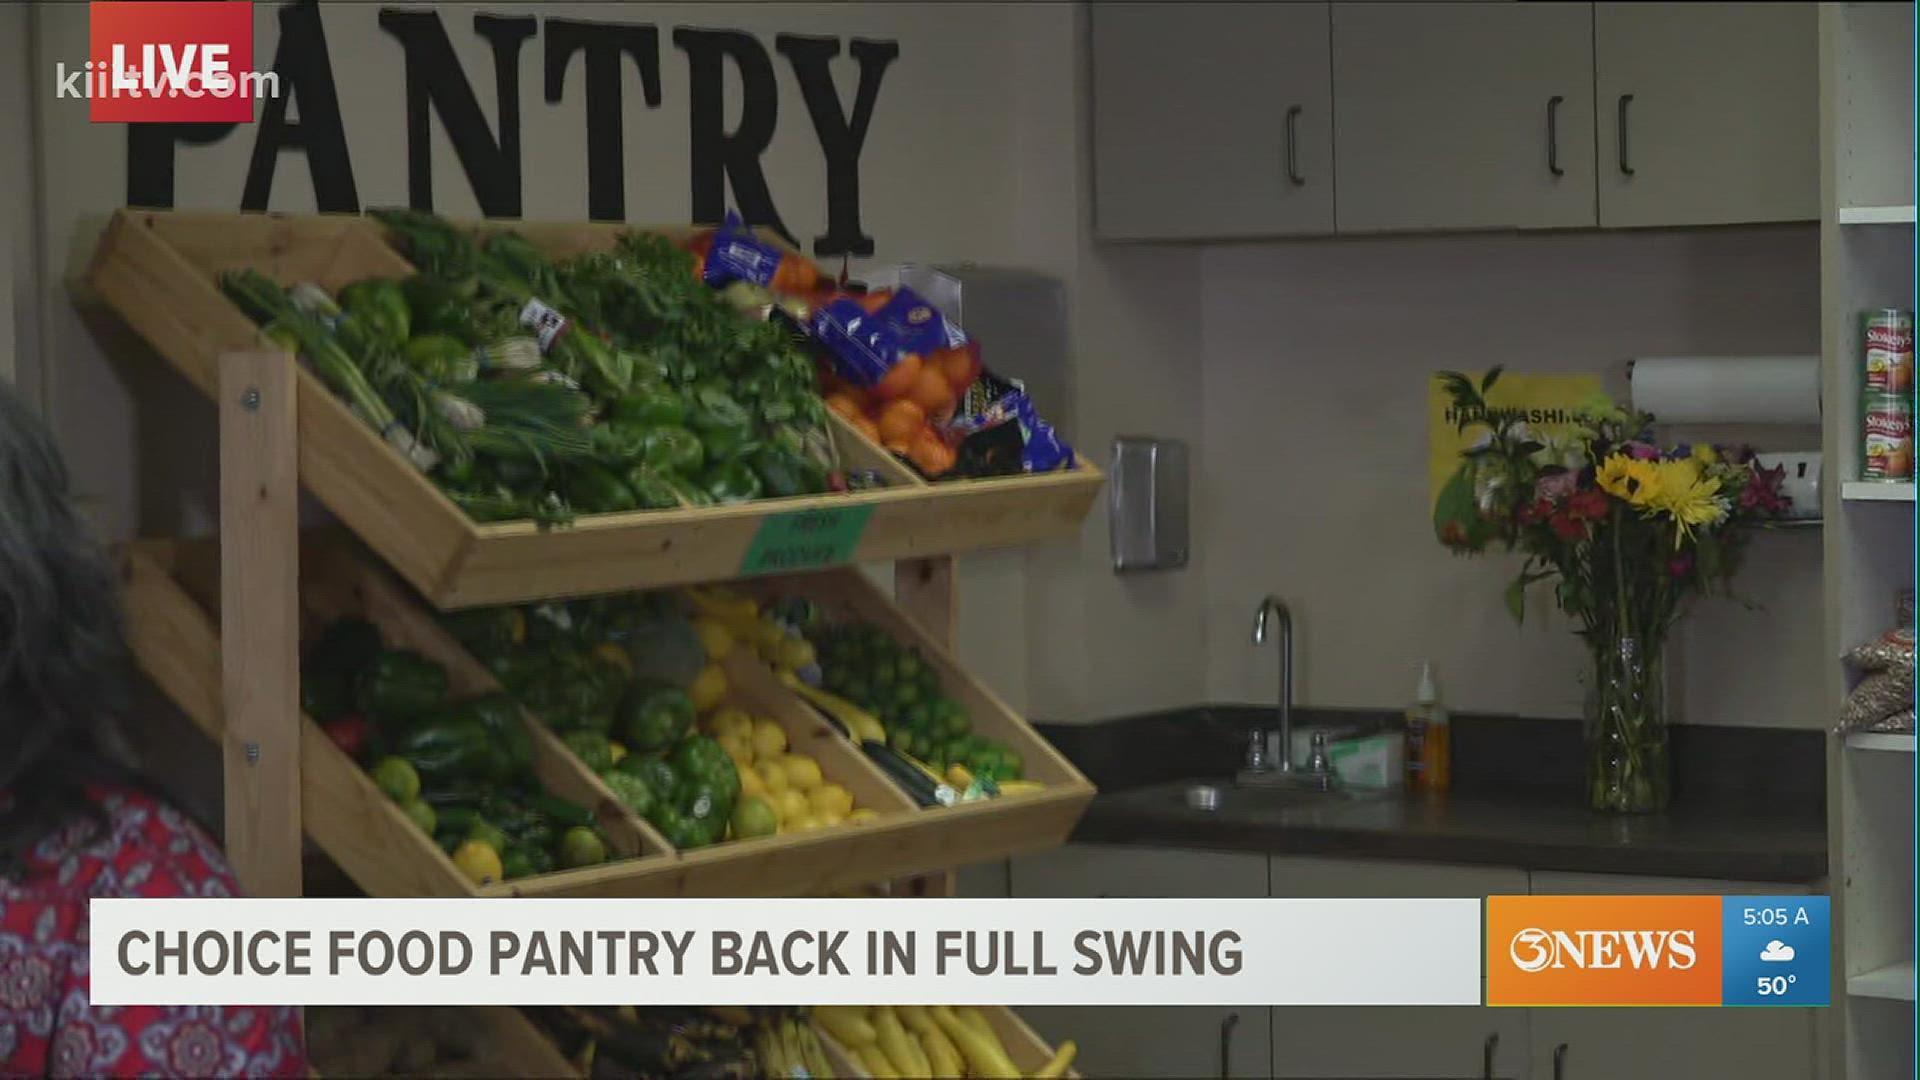 After being closed for in person shopping due to the coronavirus pandemic, the choice pantry is back!